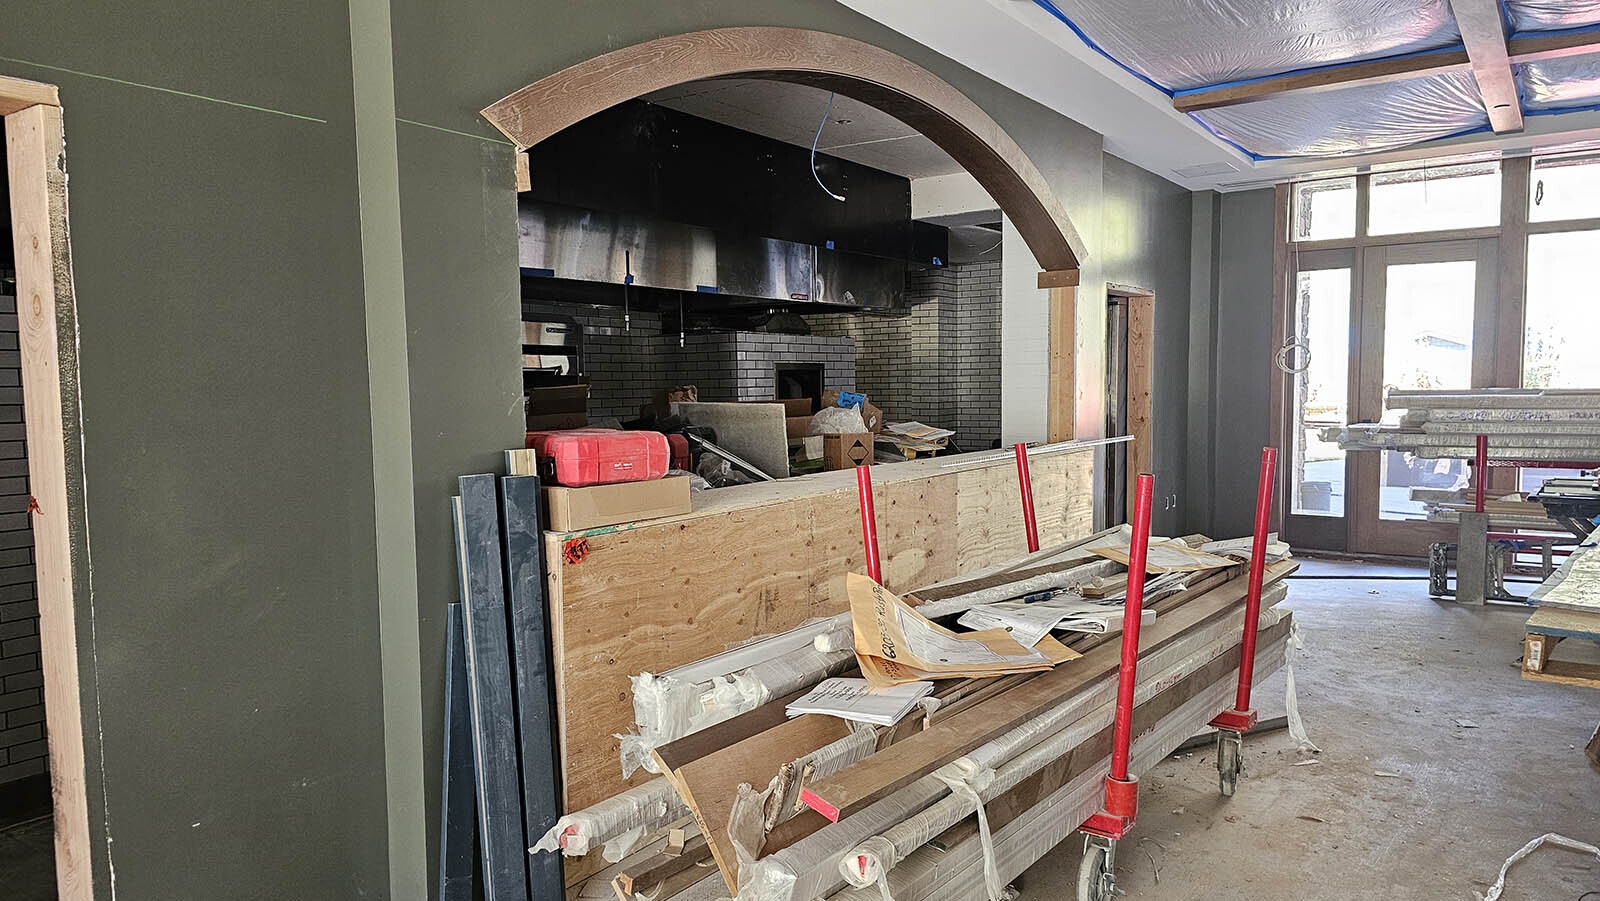 The kitchen will have a glass window so customers can see food being prepared.